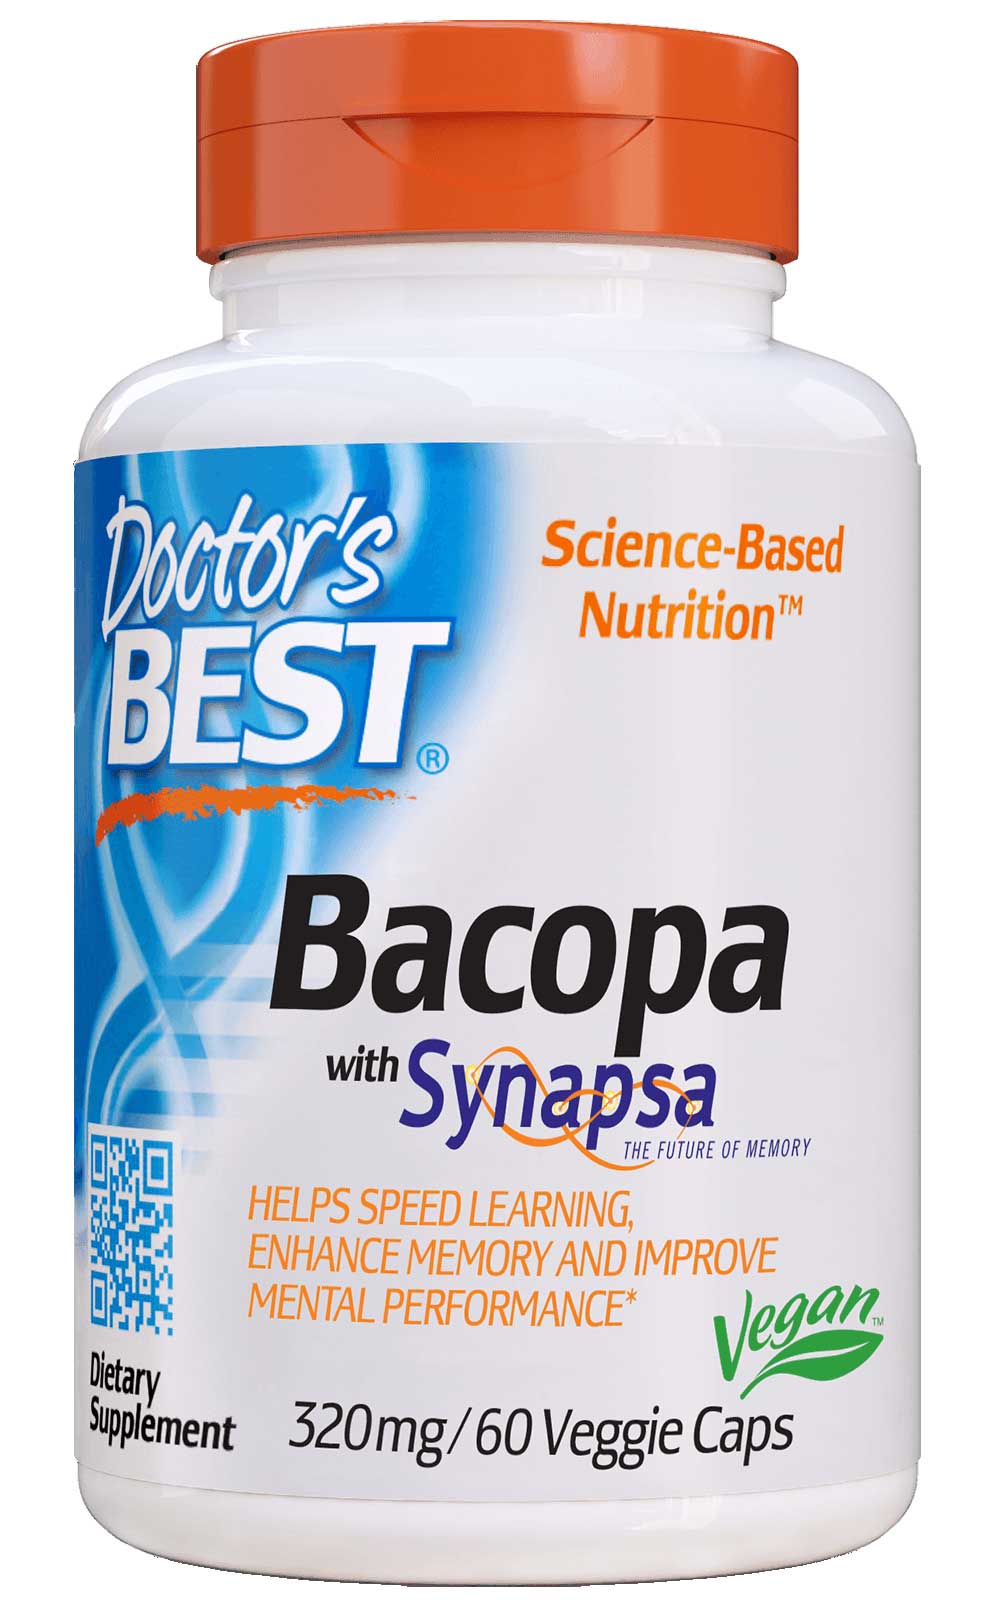 Doctor's Best Bacopa with Synapsa